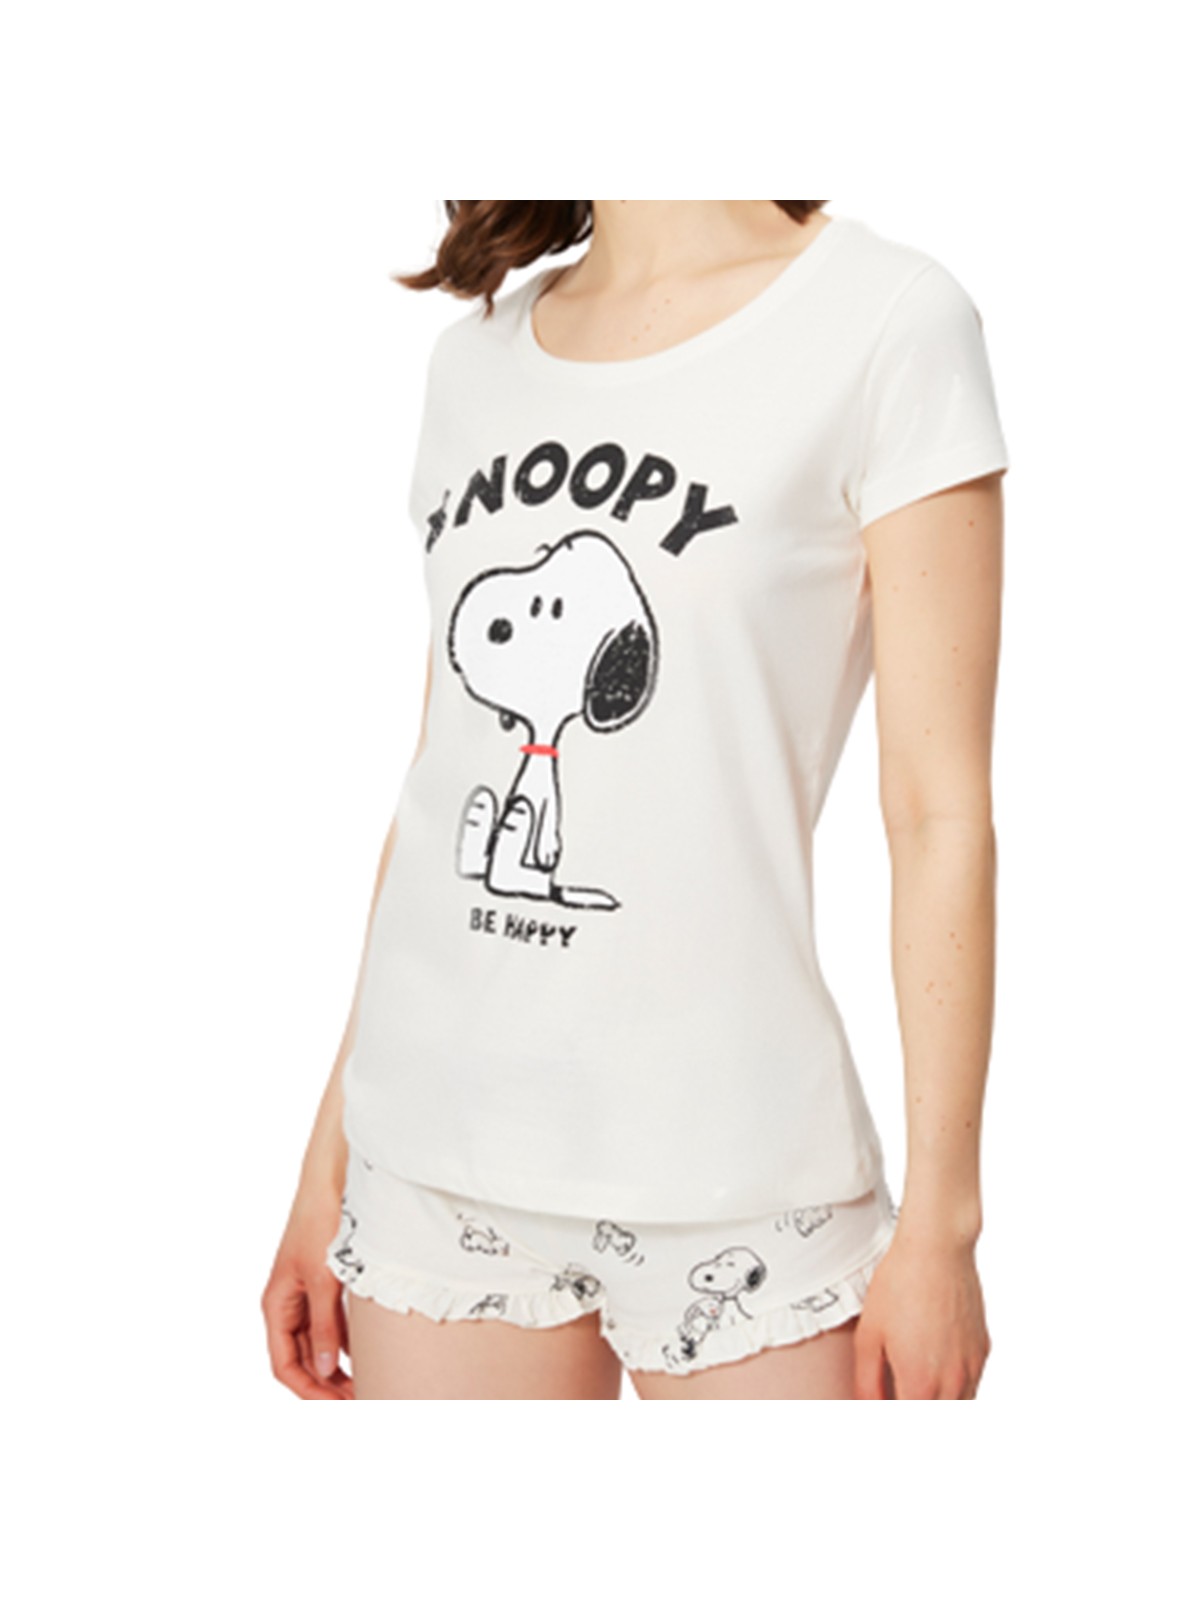 snoopy pajamas for adults